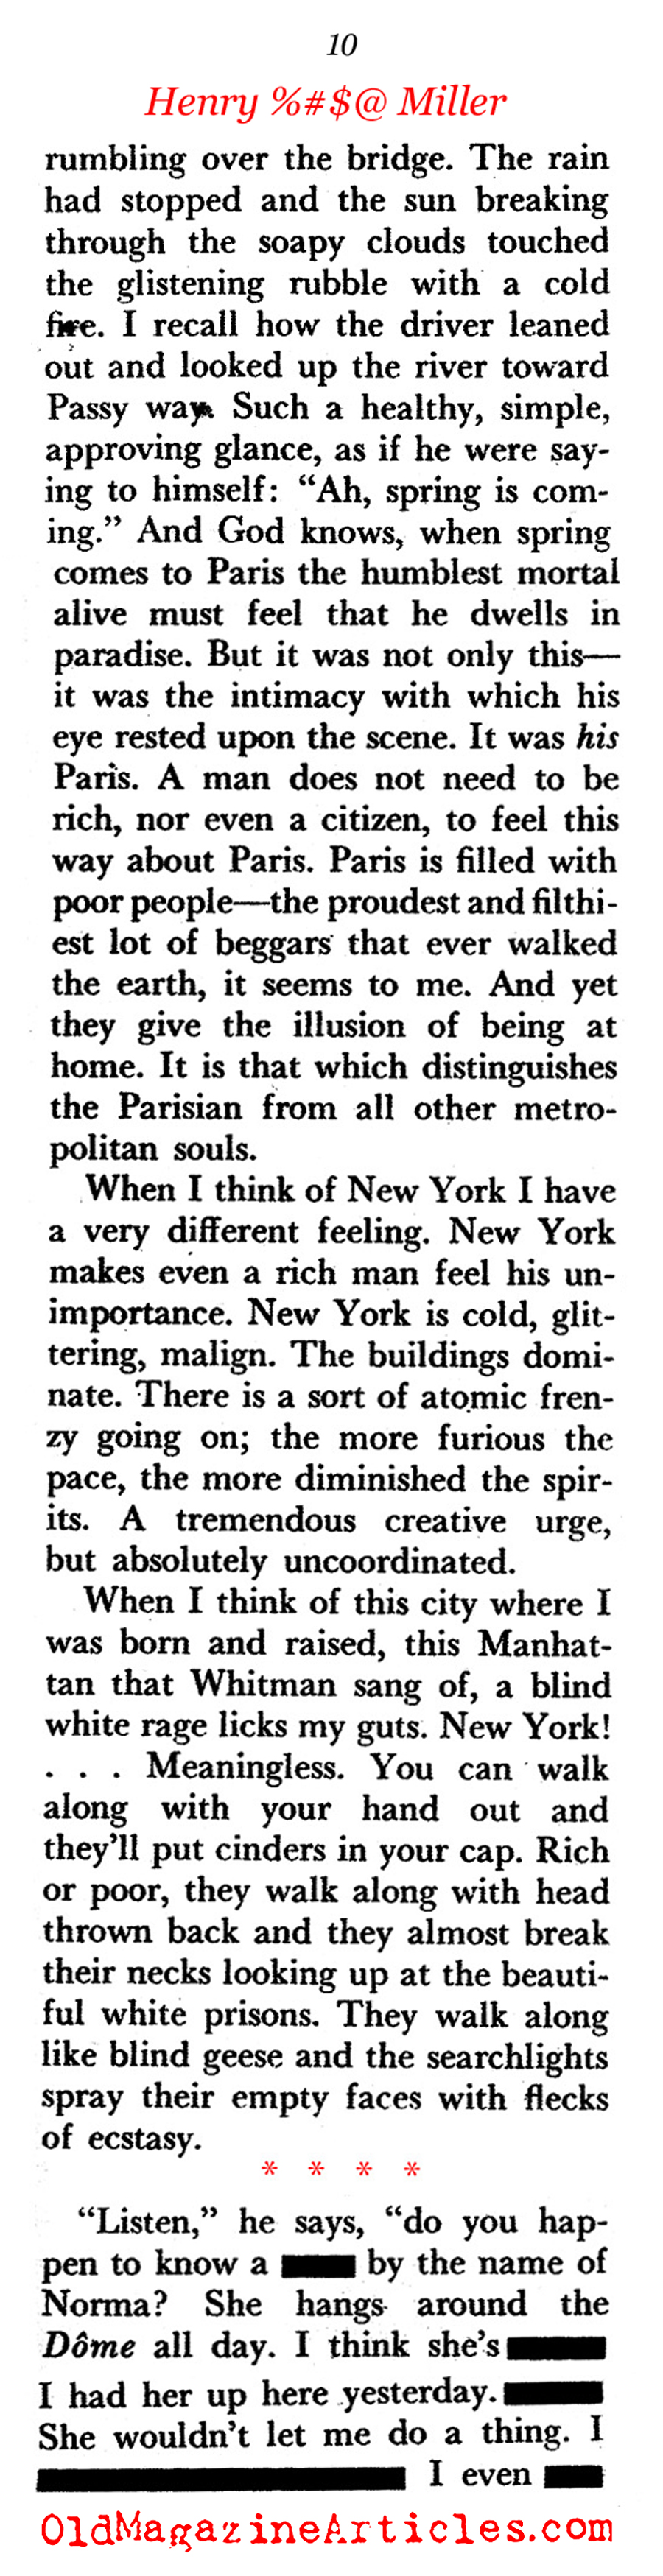 Henry Miller (Pageant Magazine, 1958)